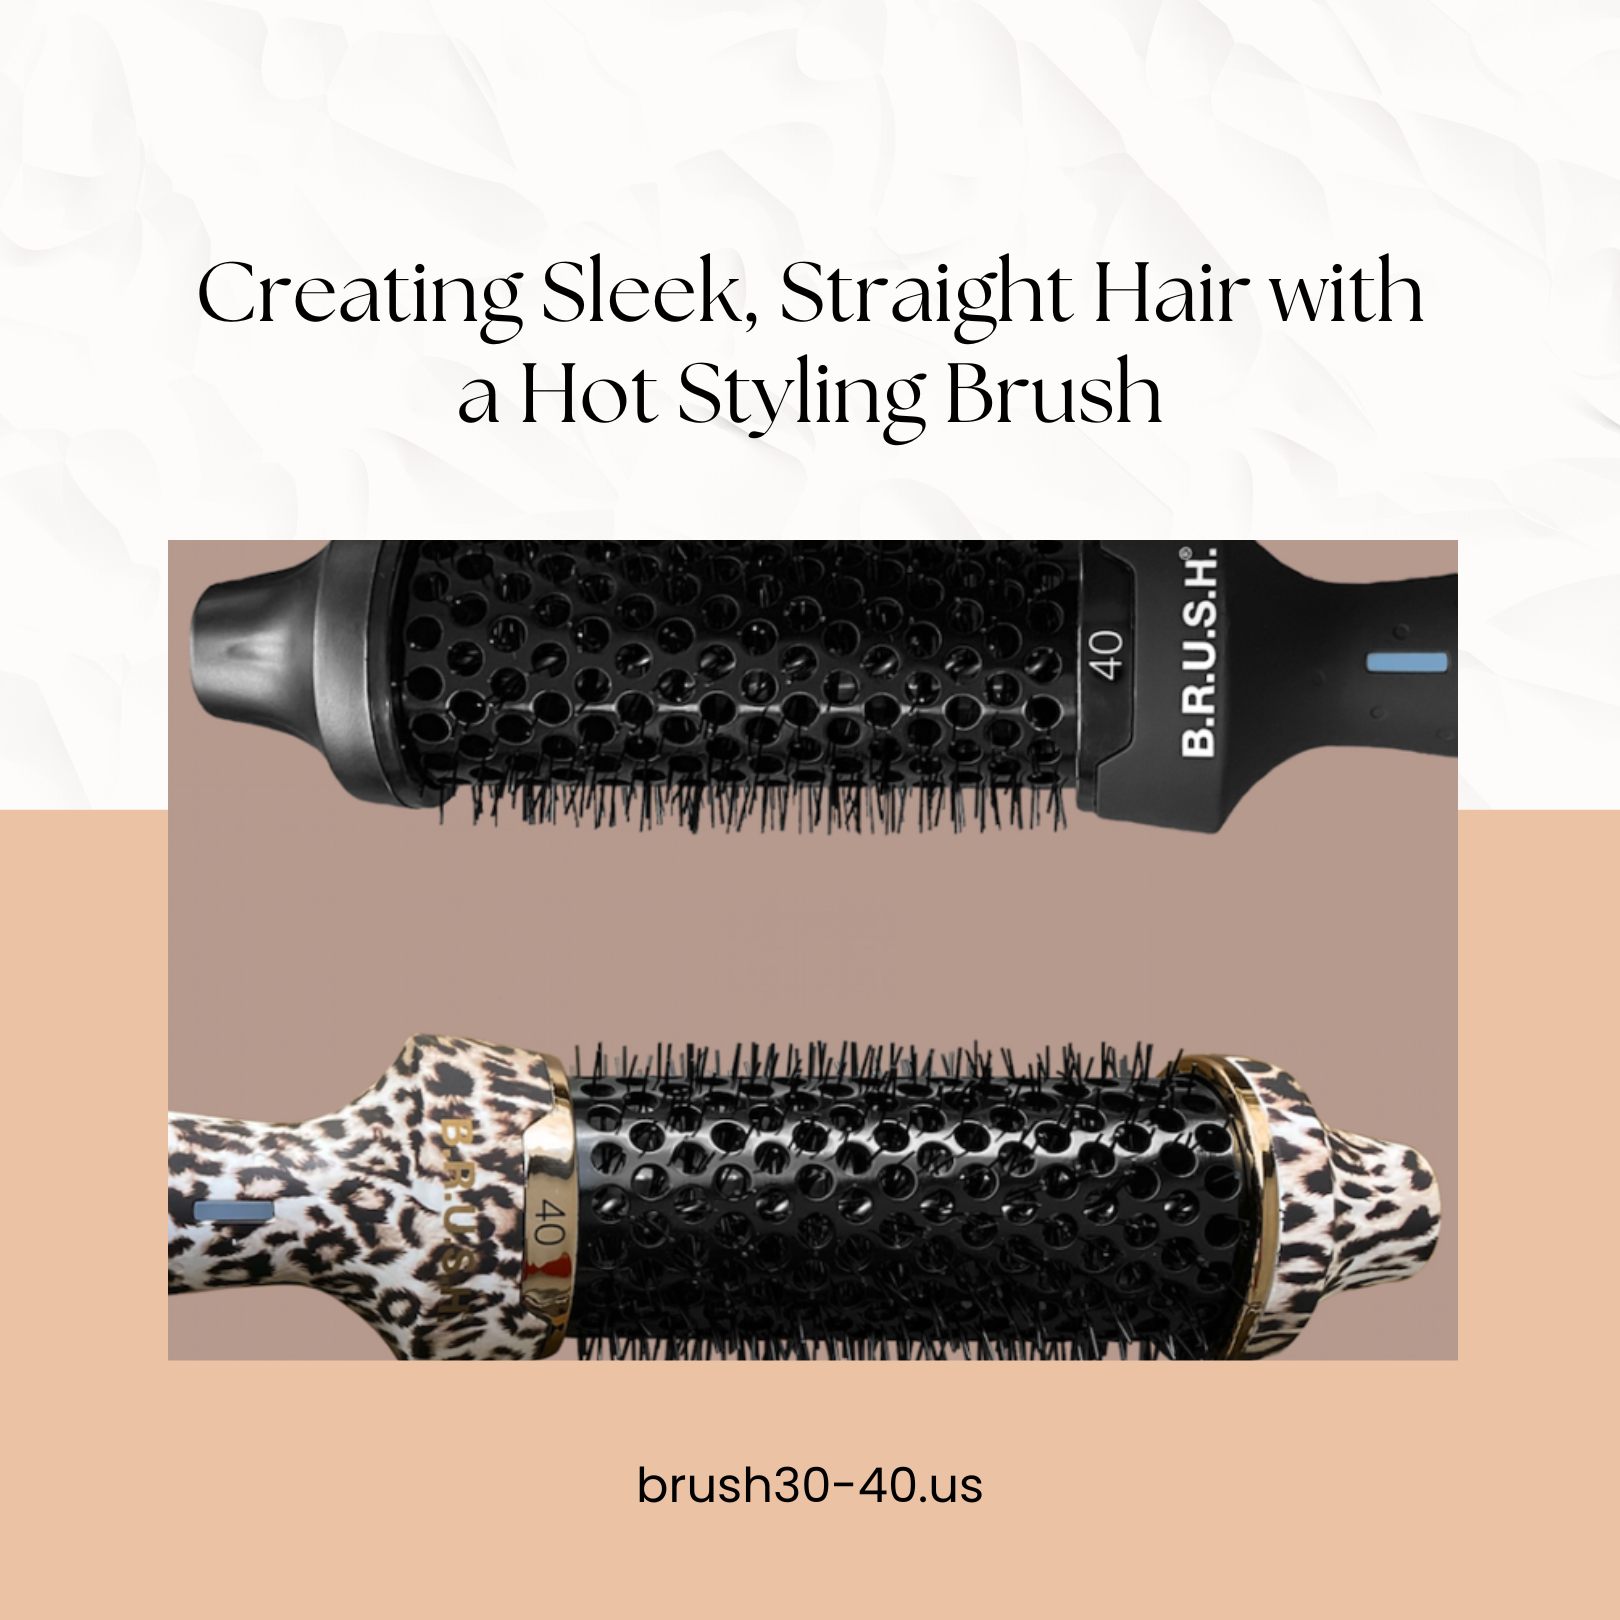 Creating Sleek, Straight Hair with a Hot Styling Brush